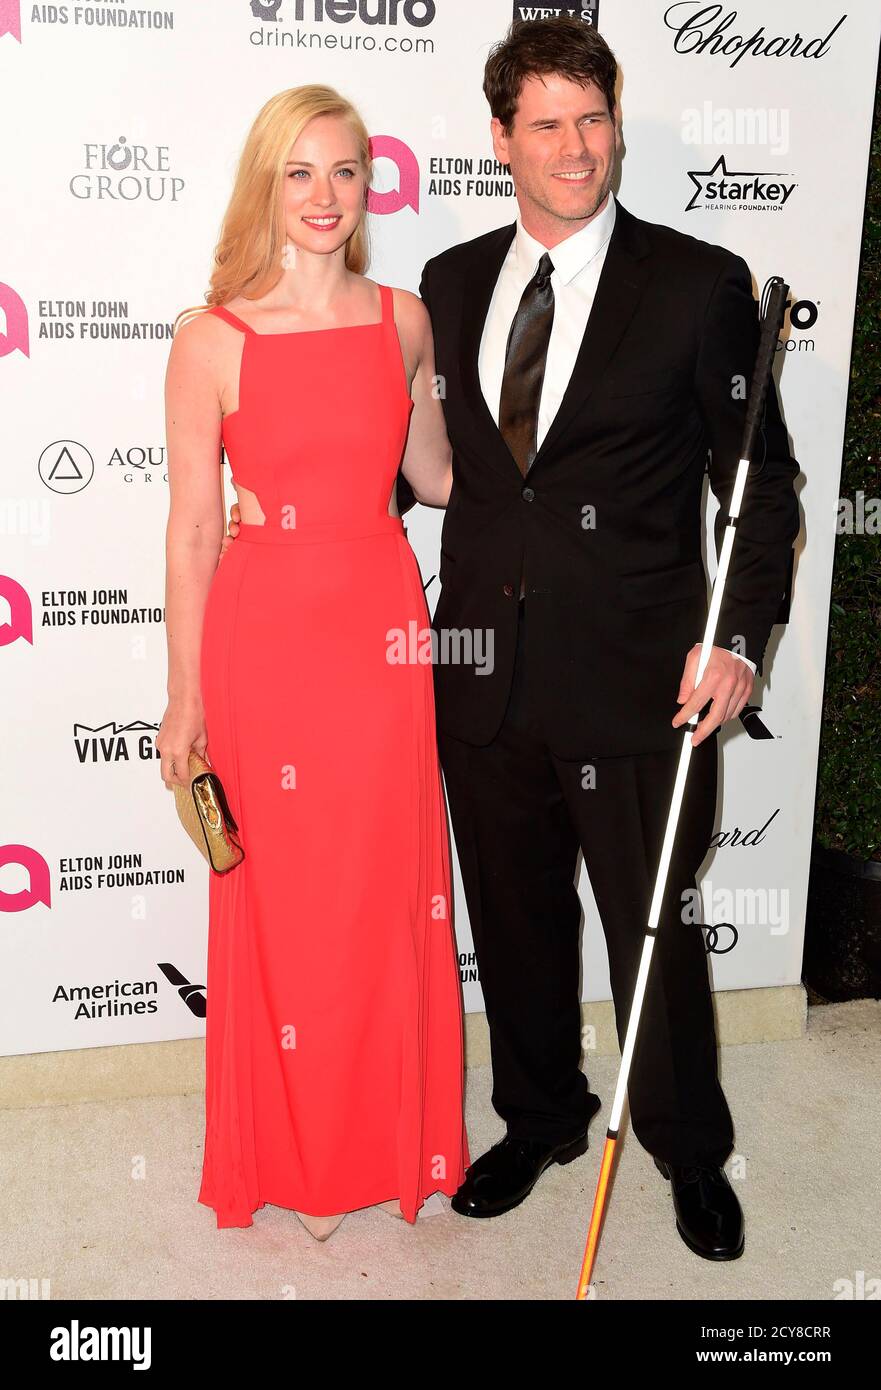 Actress Deborah Ann Woll and E.J. Scott arrive  at the 2015 Elton John AIDS Foundation Oscar Party in West Hollywood, California February  22, 2015.  REUTERS/Gus Ruelas (UNITED STATES  - Tags: ENTERTAINMENT) (OSCAR-PARTIES) Foto de stock